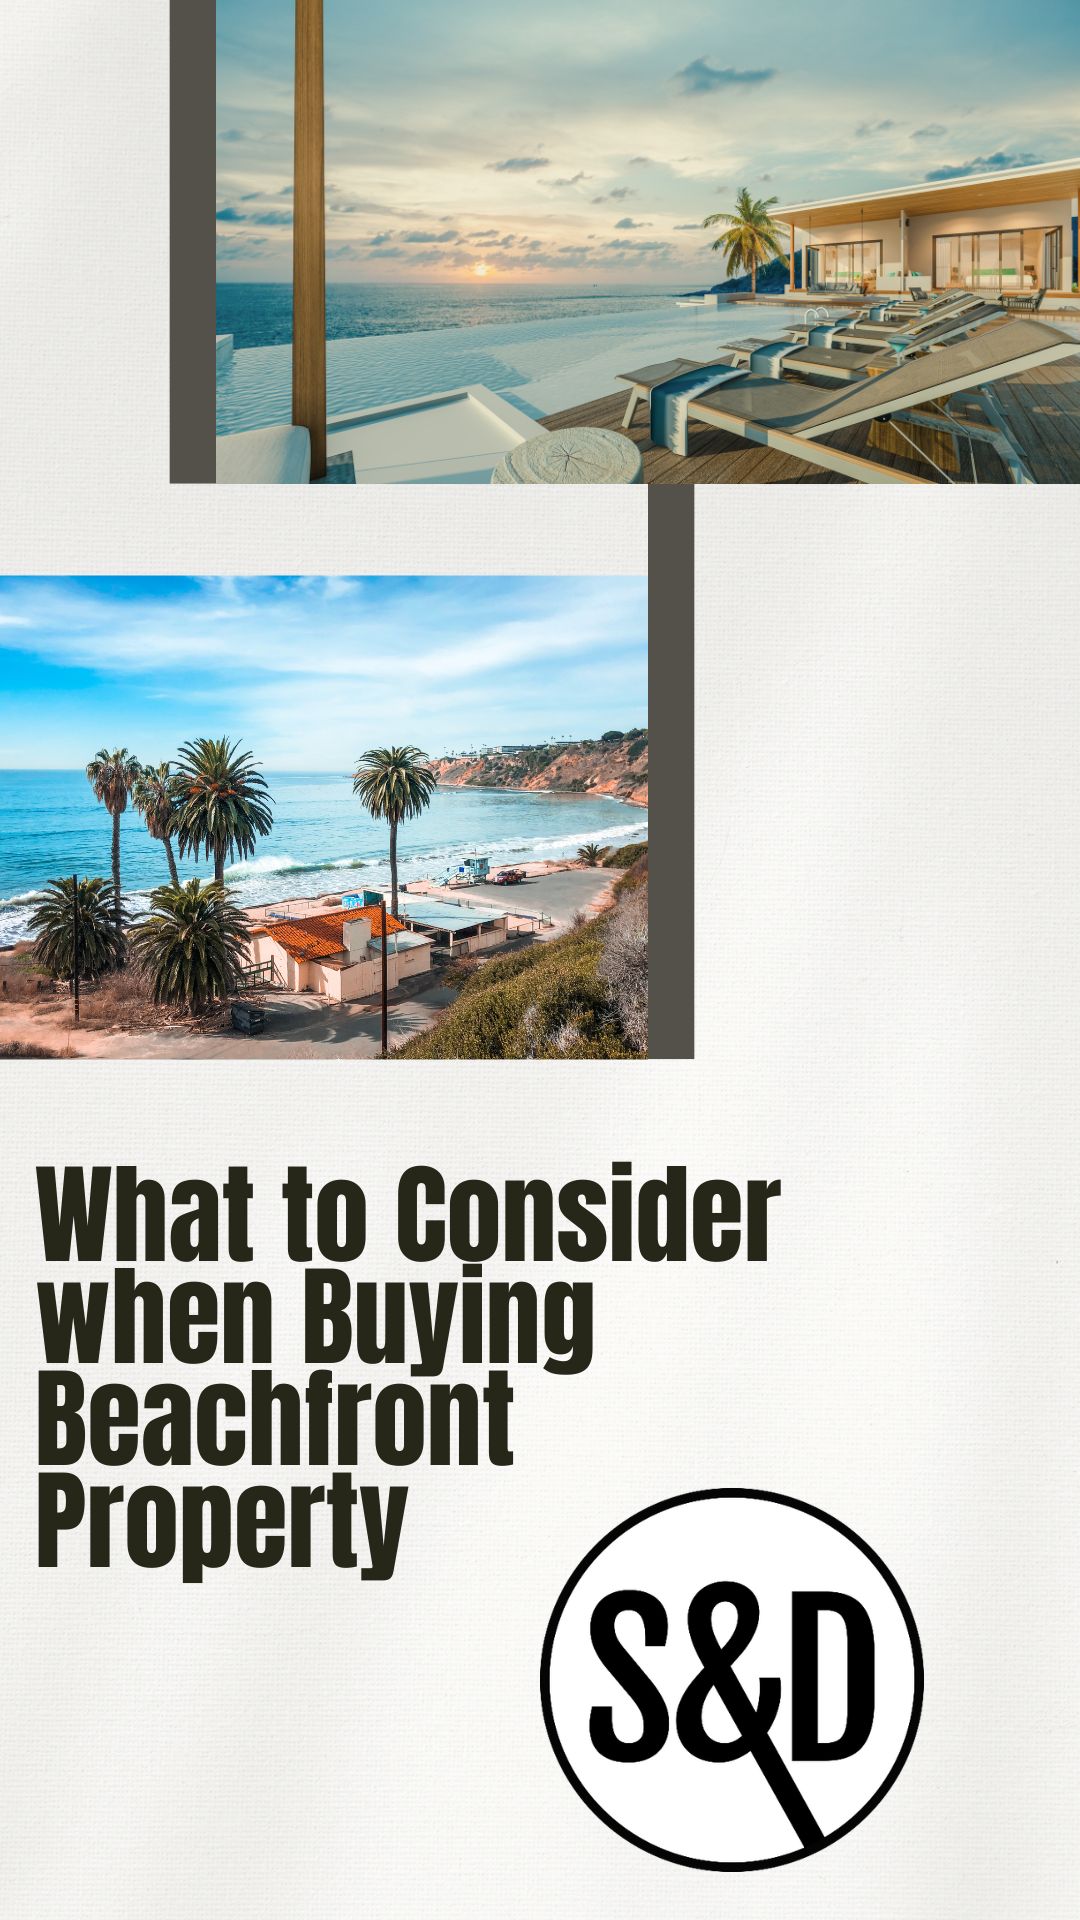 What to Consider when Buying Beachfront Property